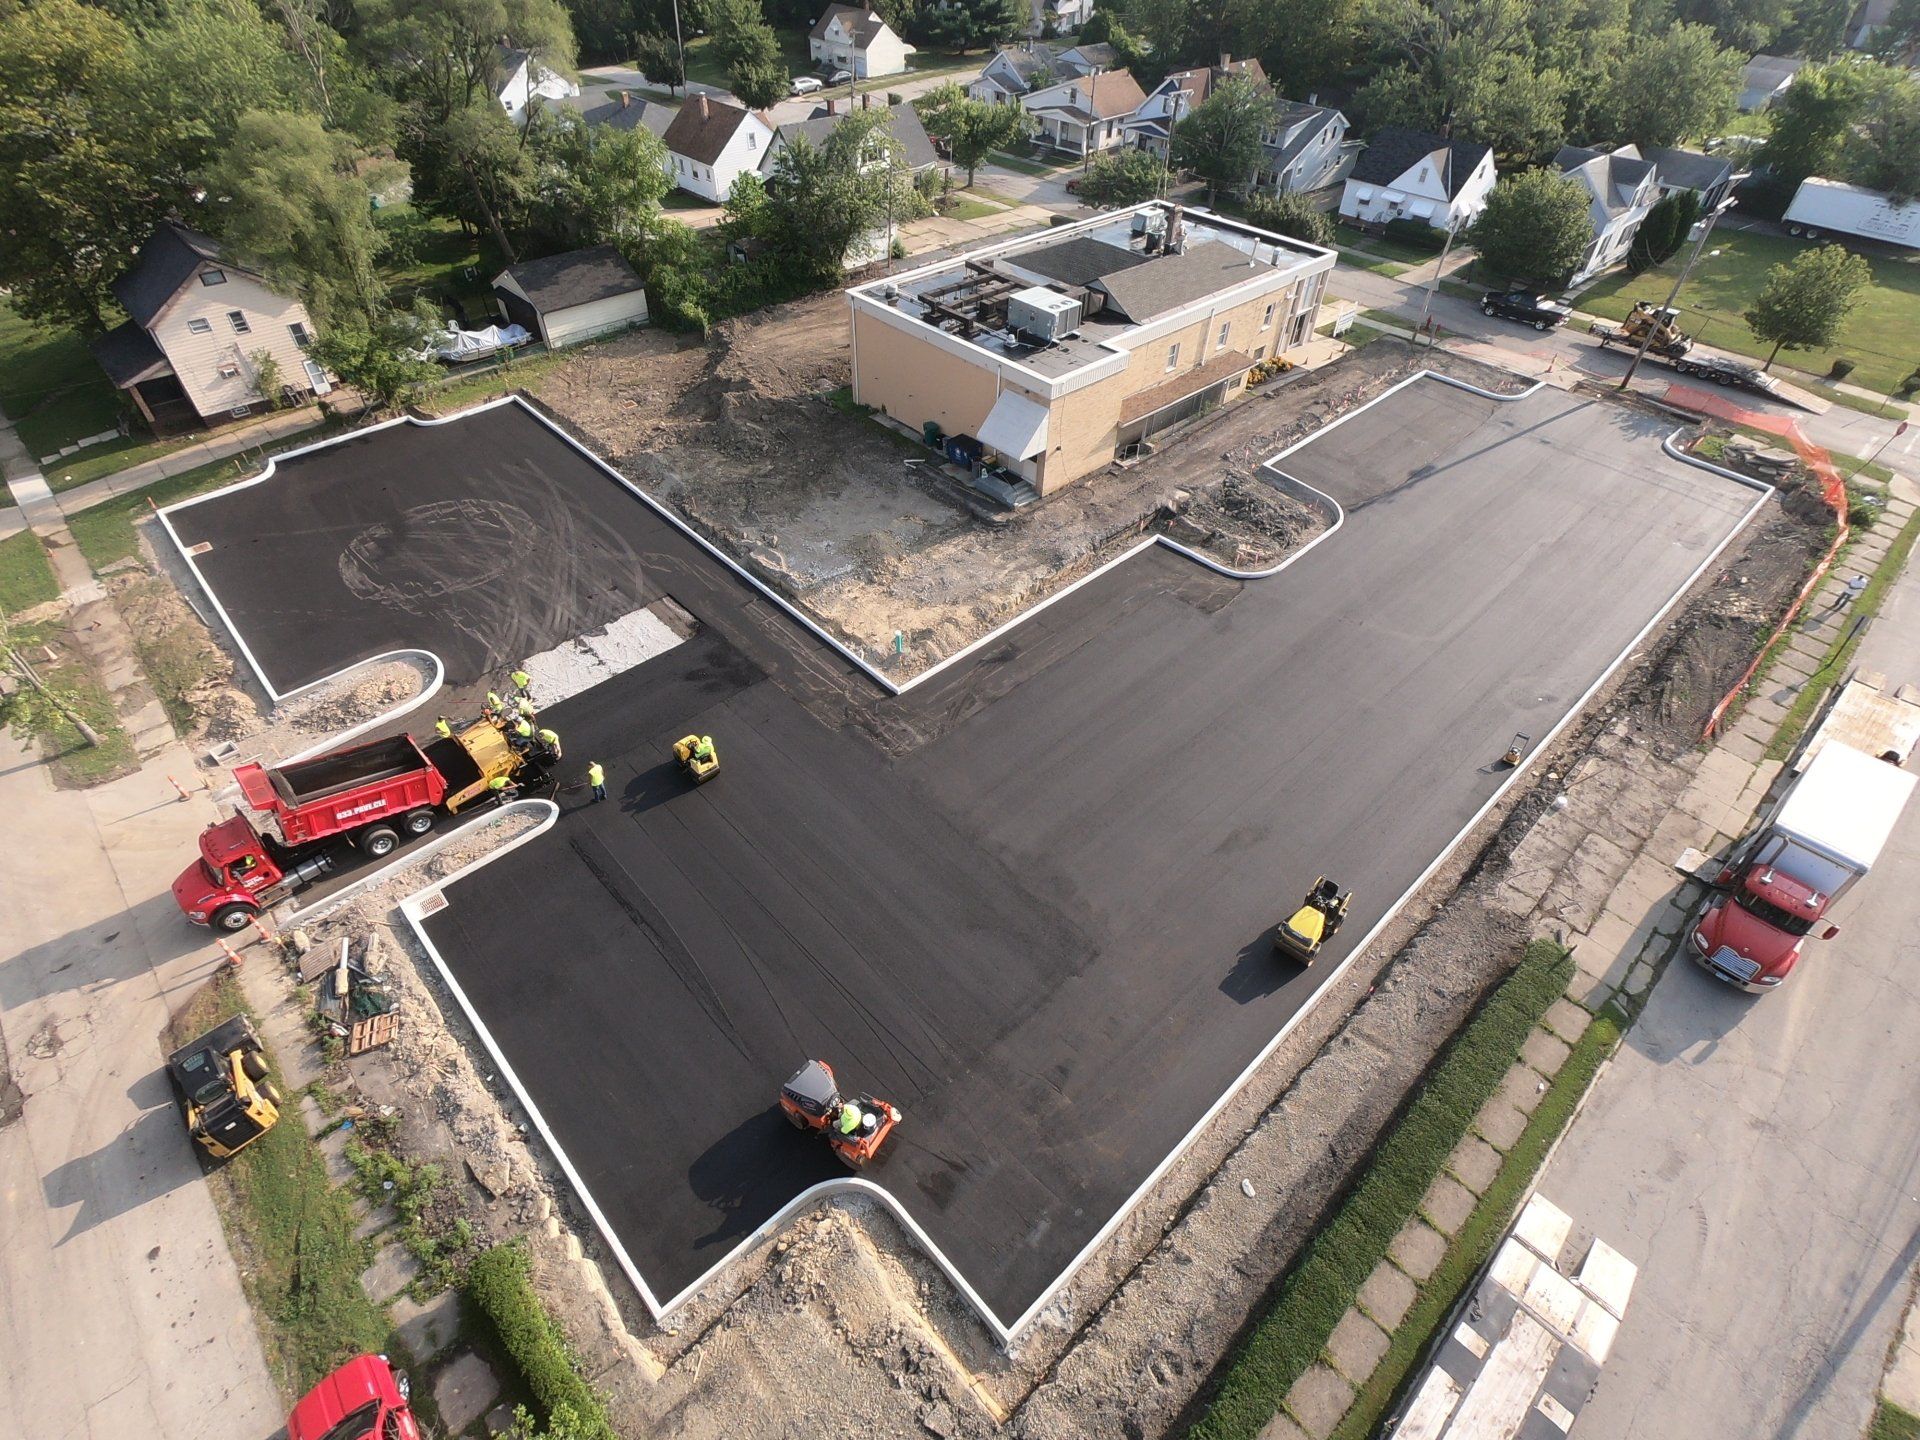 New Construction of Parking Lot – After